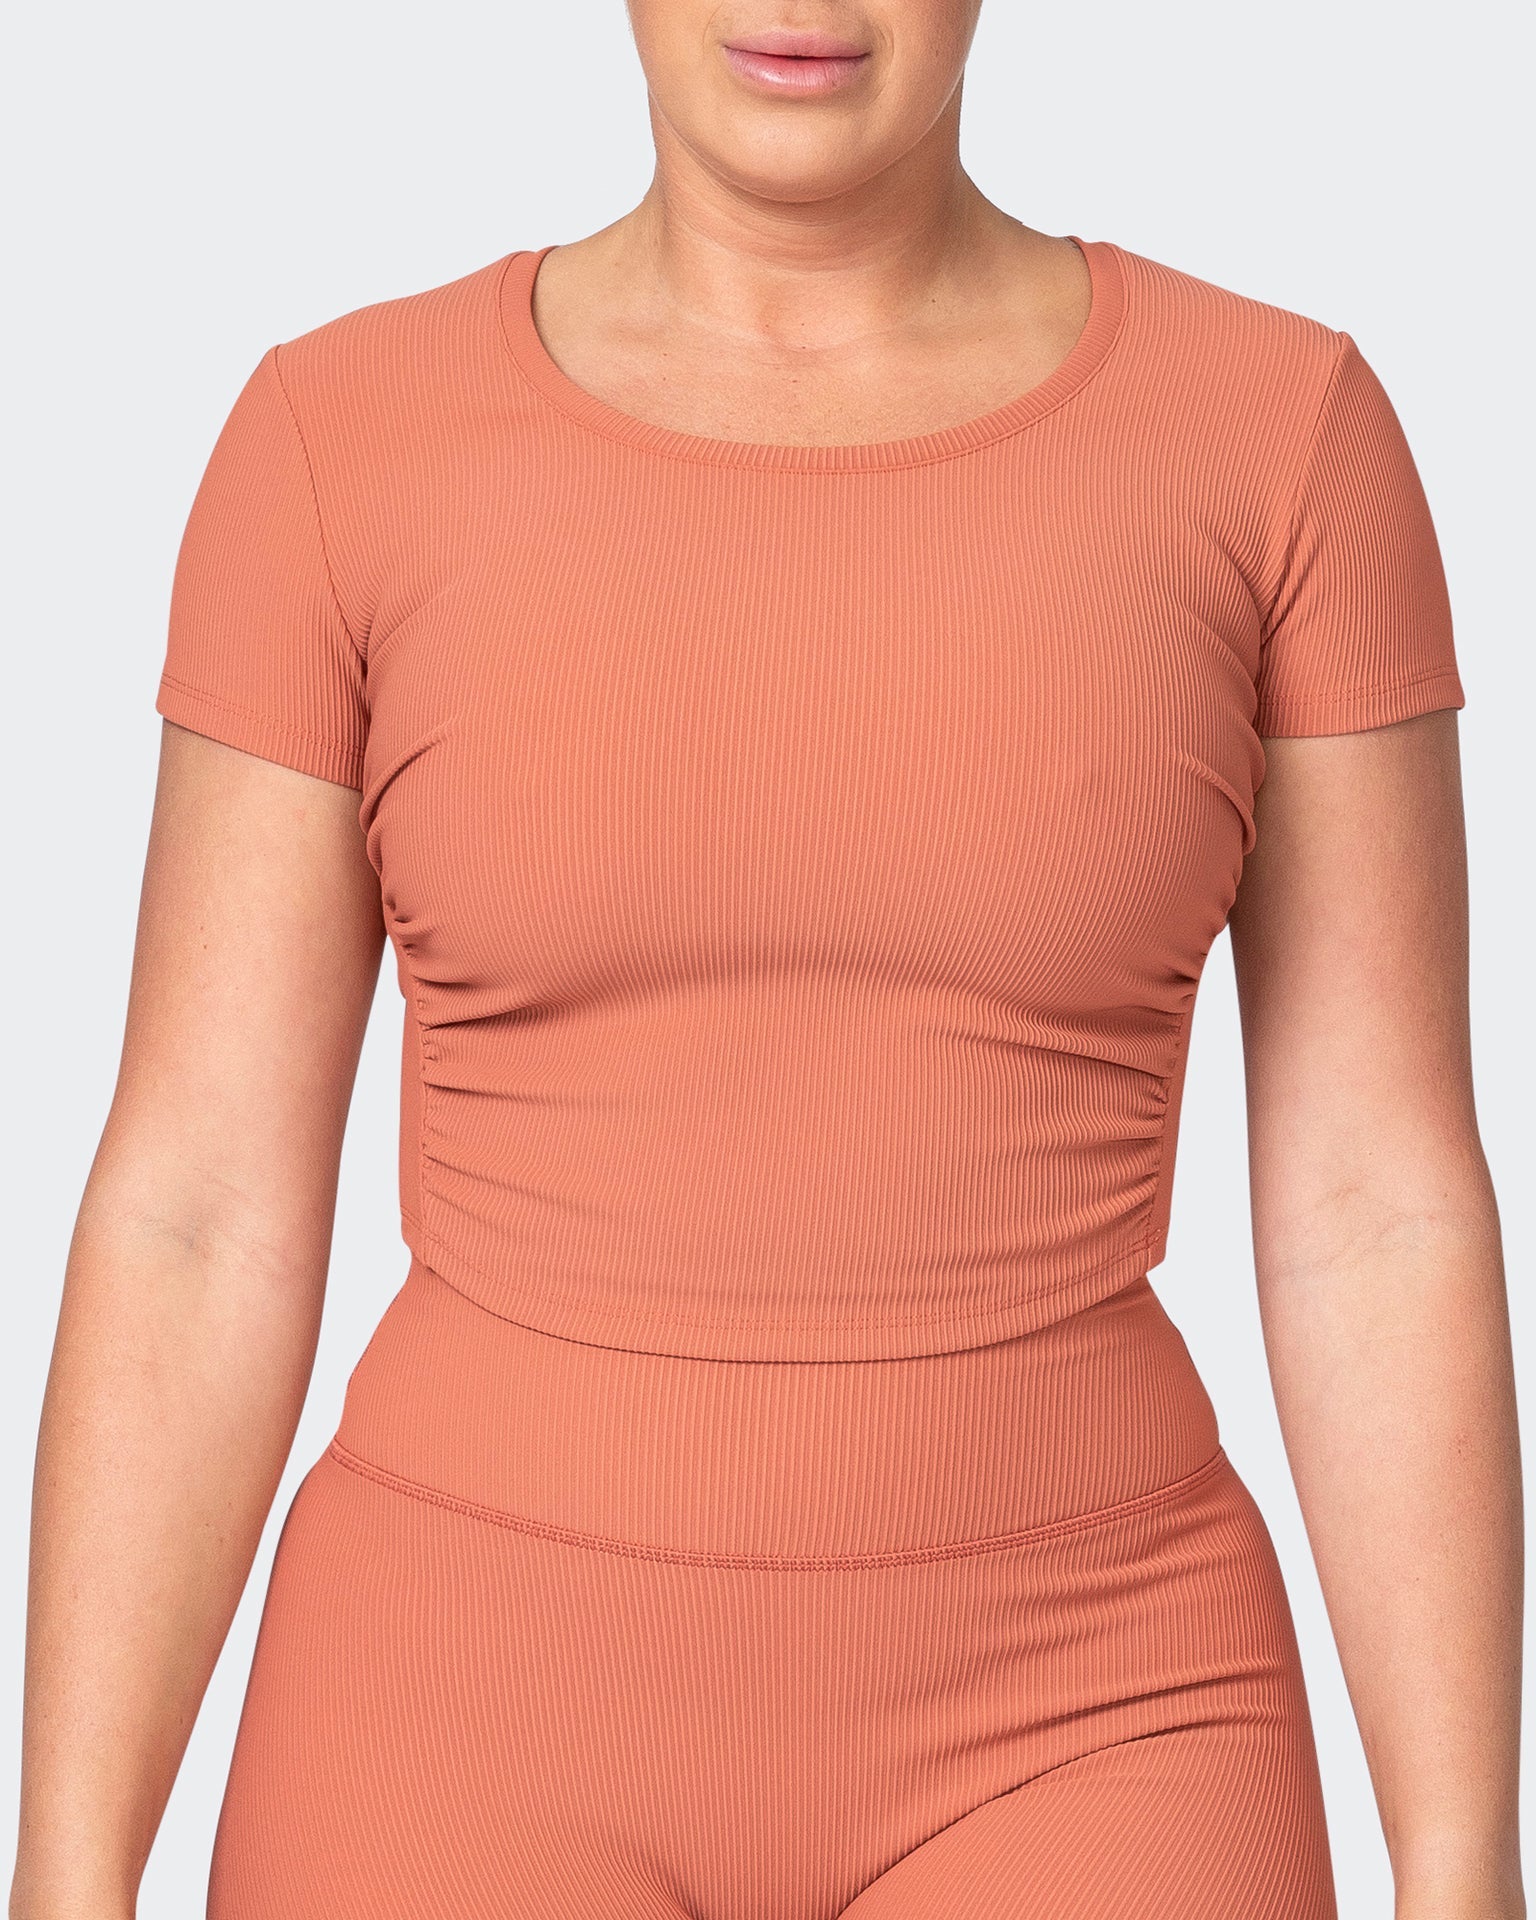 musclenation T-Shirts Rival Cropped Rib Top - Burnt Sienna